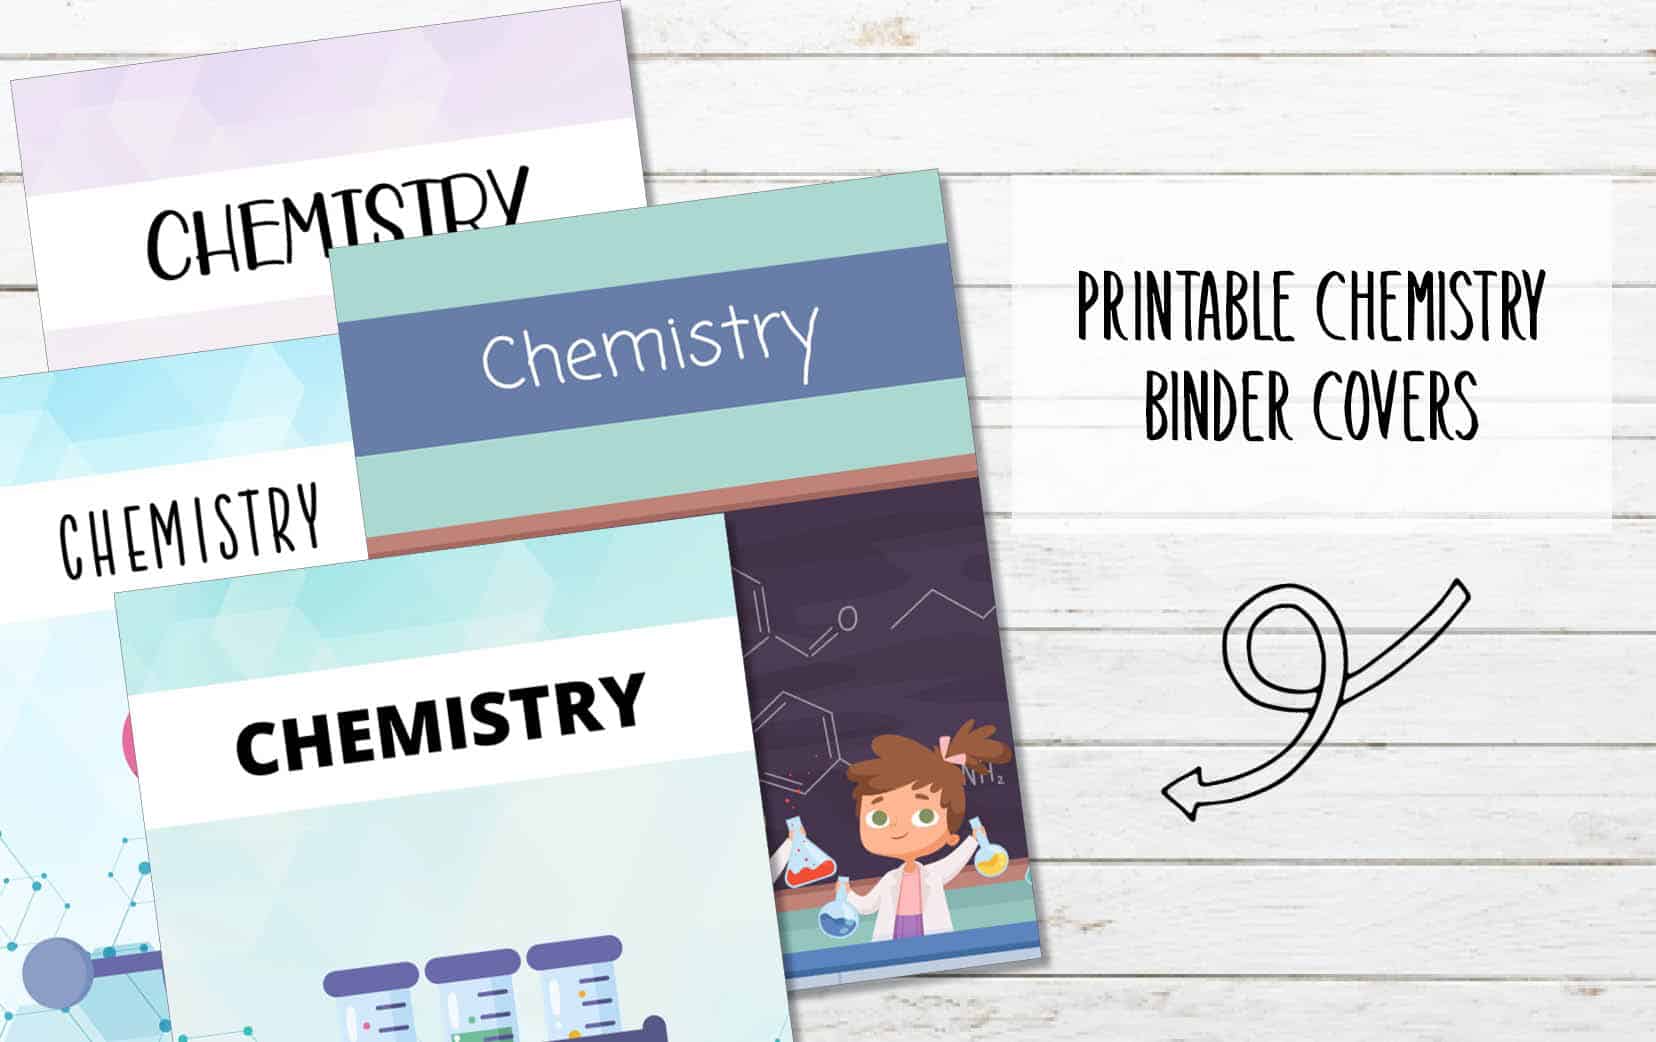 main picture of 4 binder covers on left and text in right saying printable chemistry binder covers